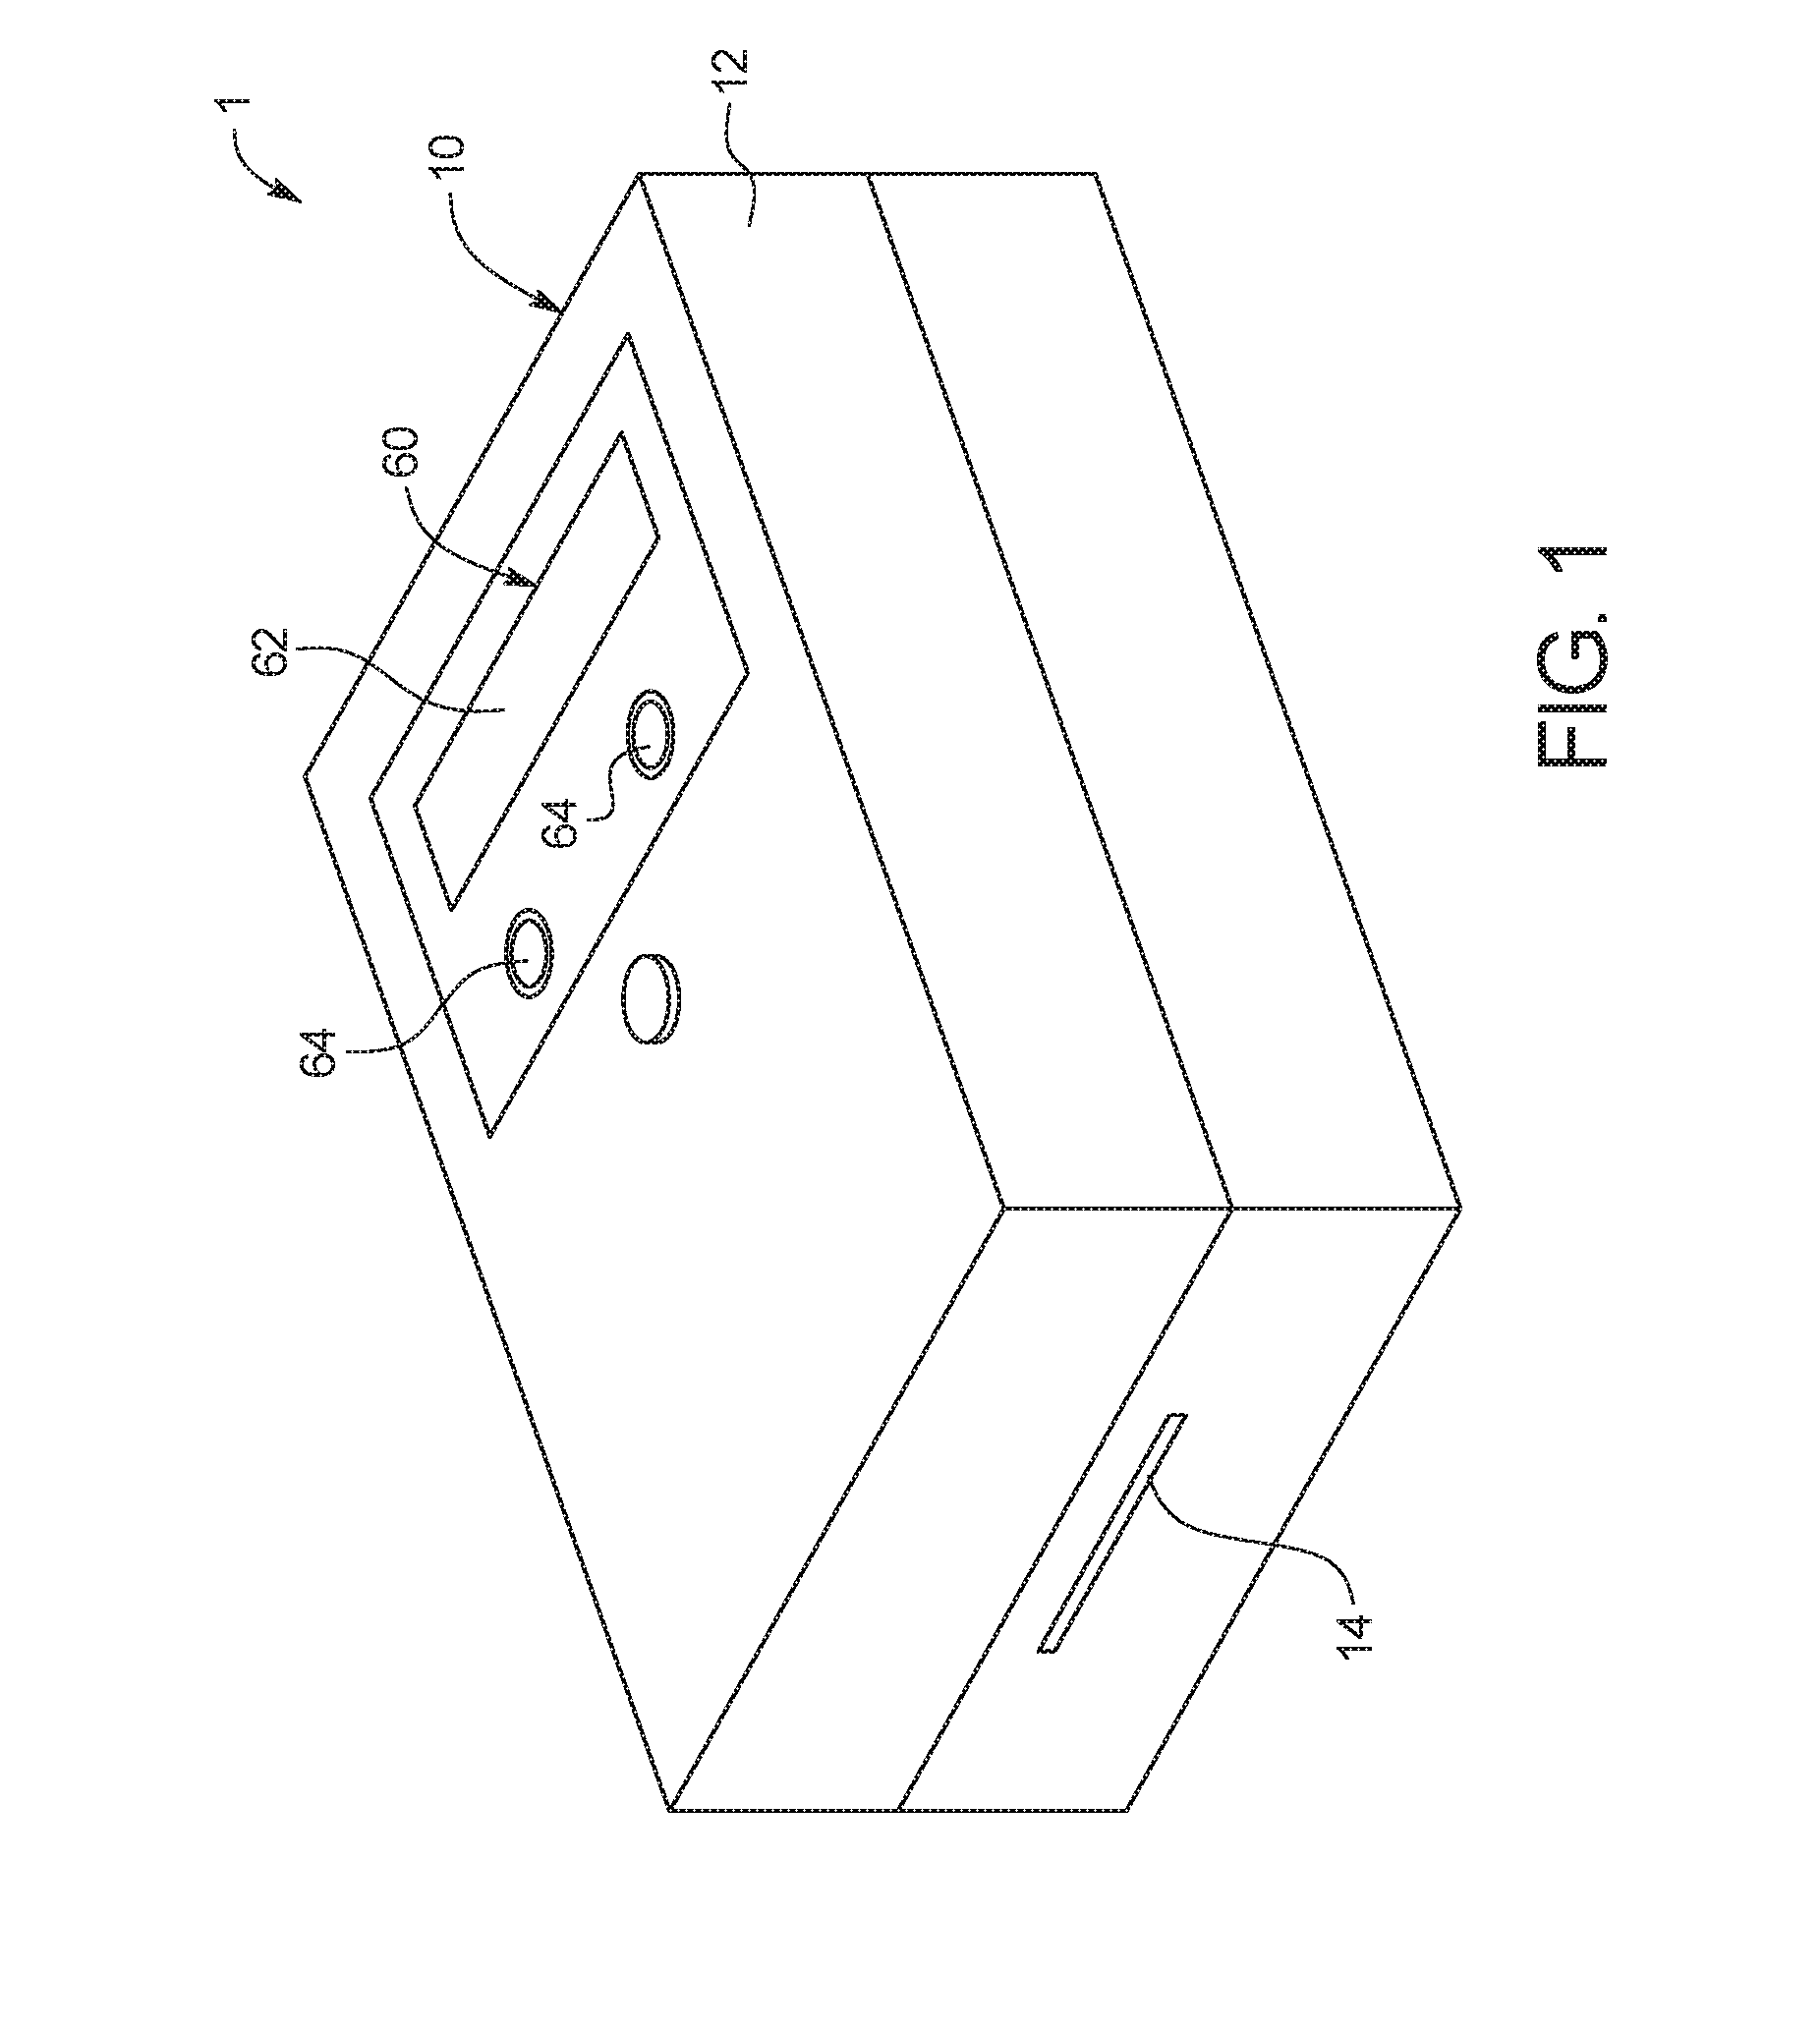 Camera imaging system for a fluid sample assay and method of using same